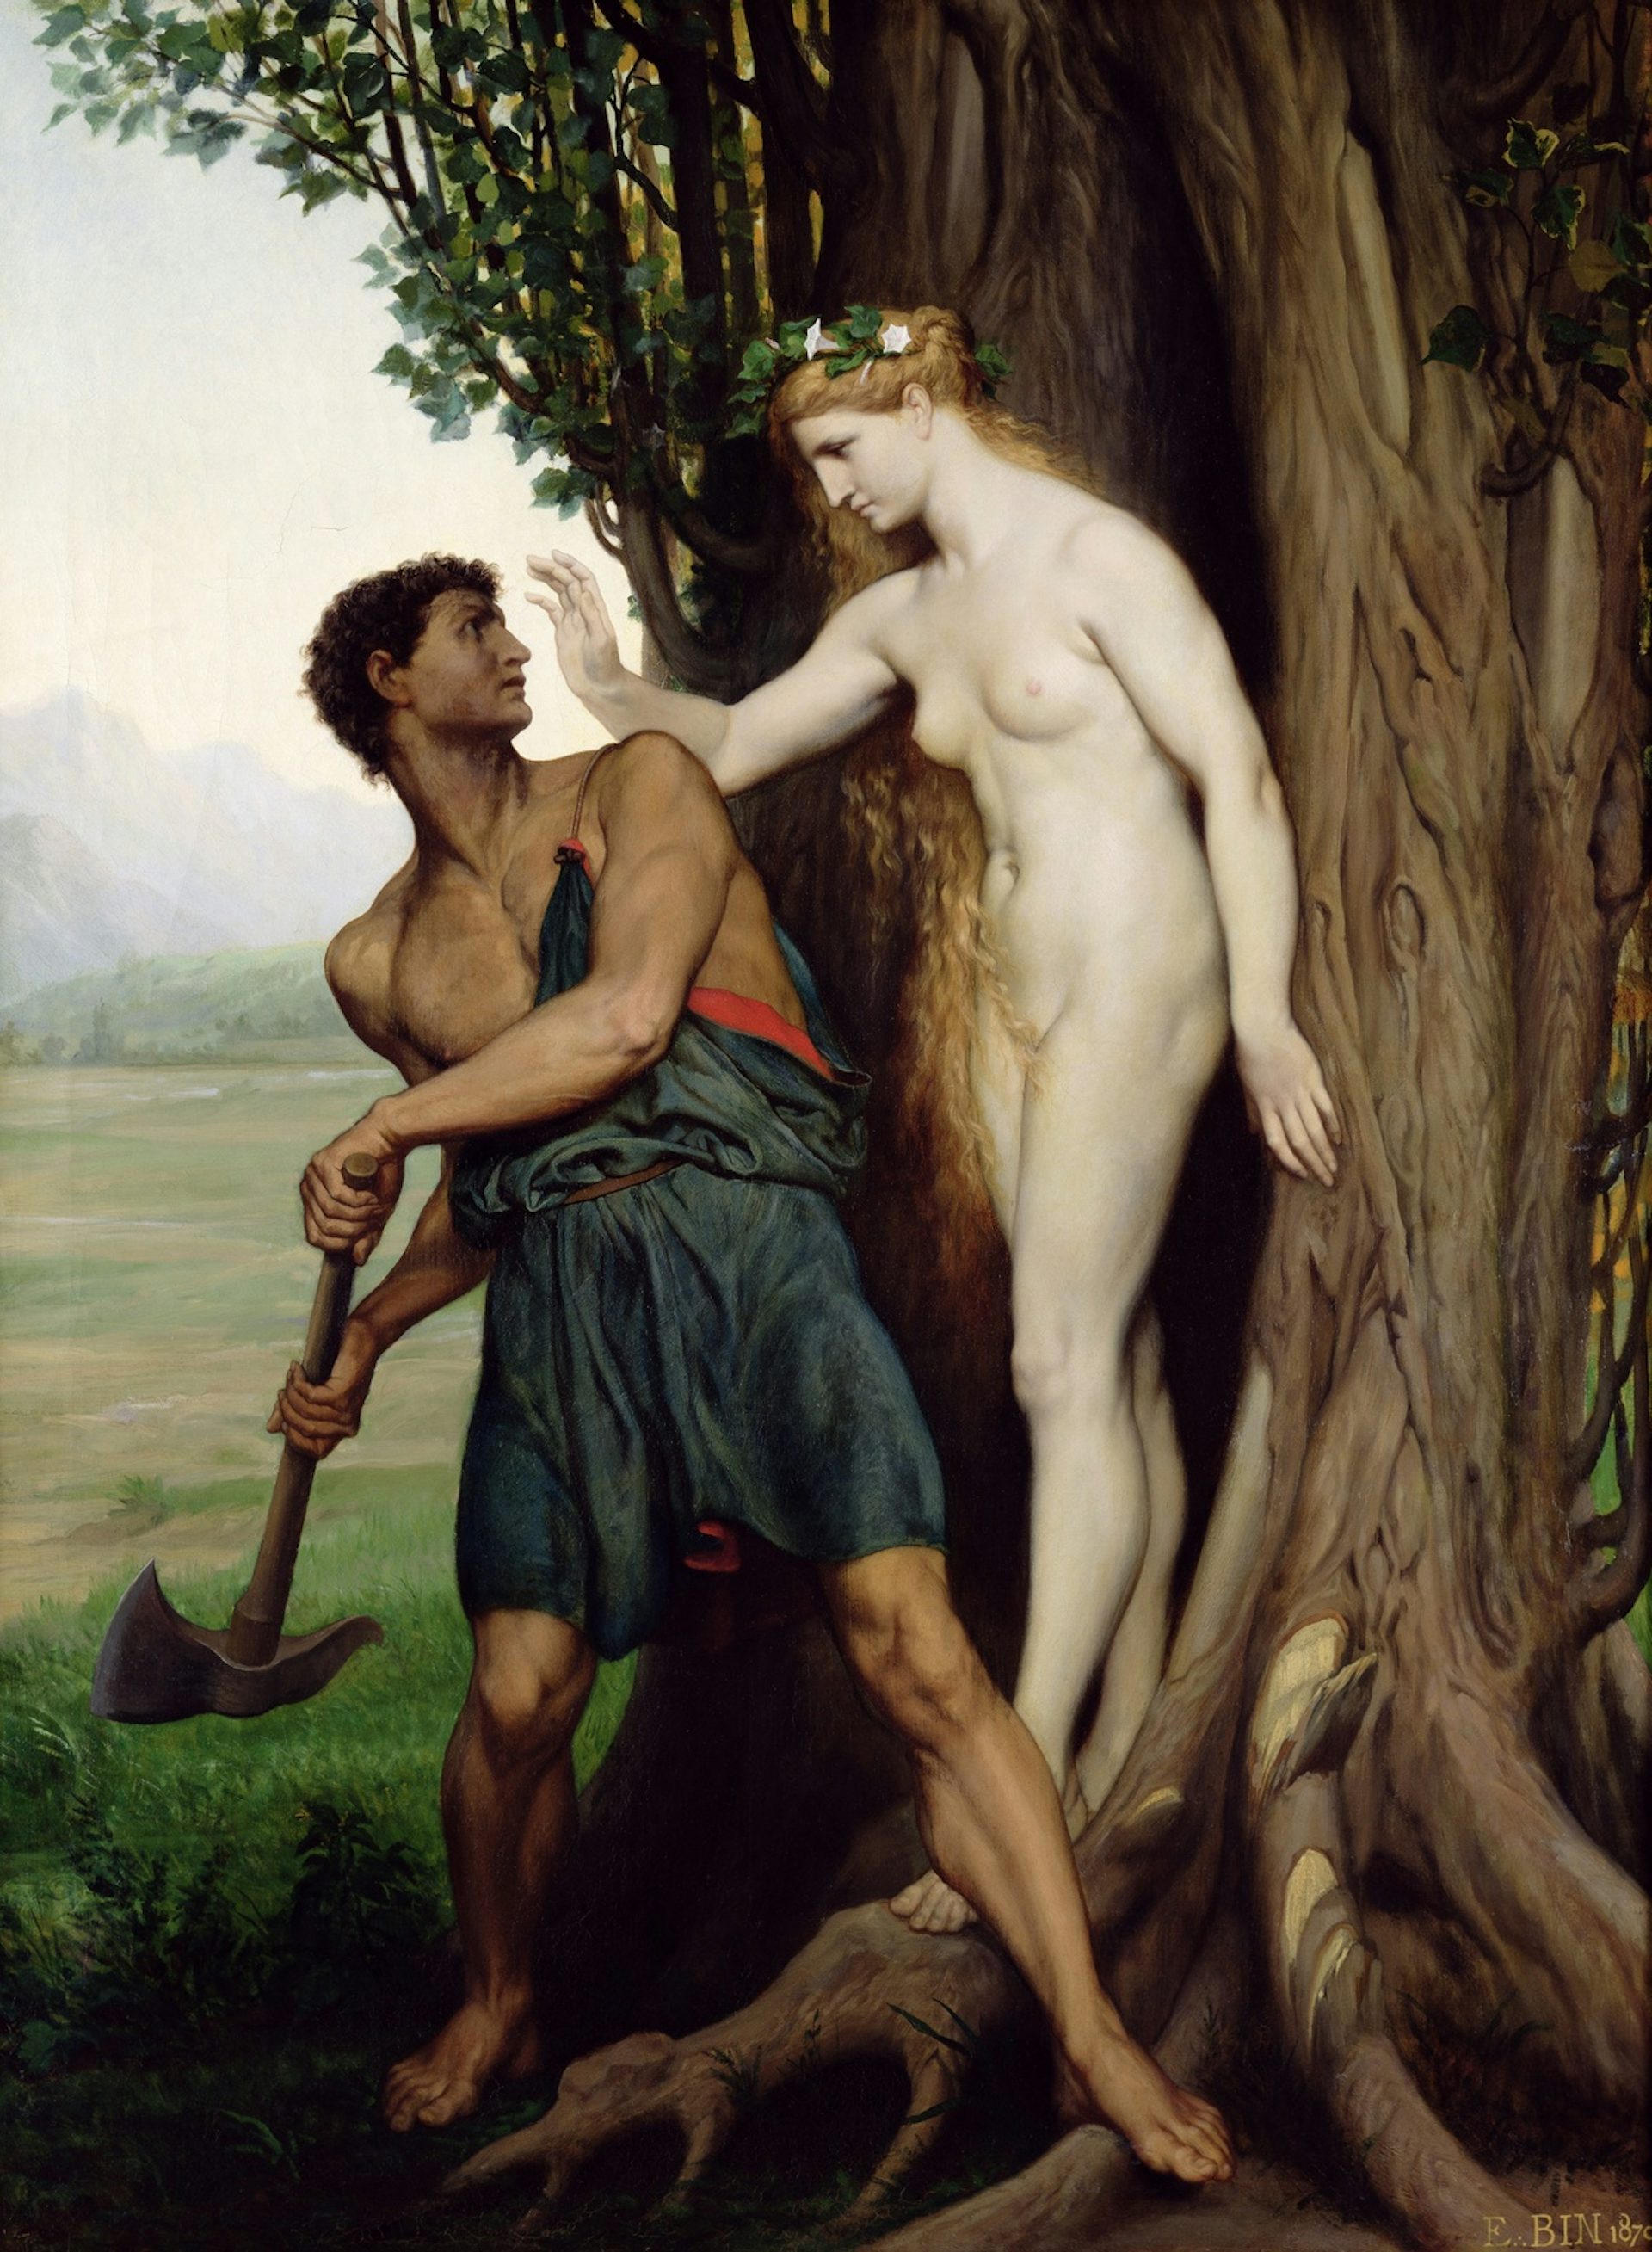 The Woodcutter and the Hamadryad Aigeiros by Émile Bin